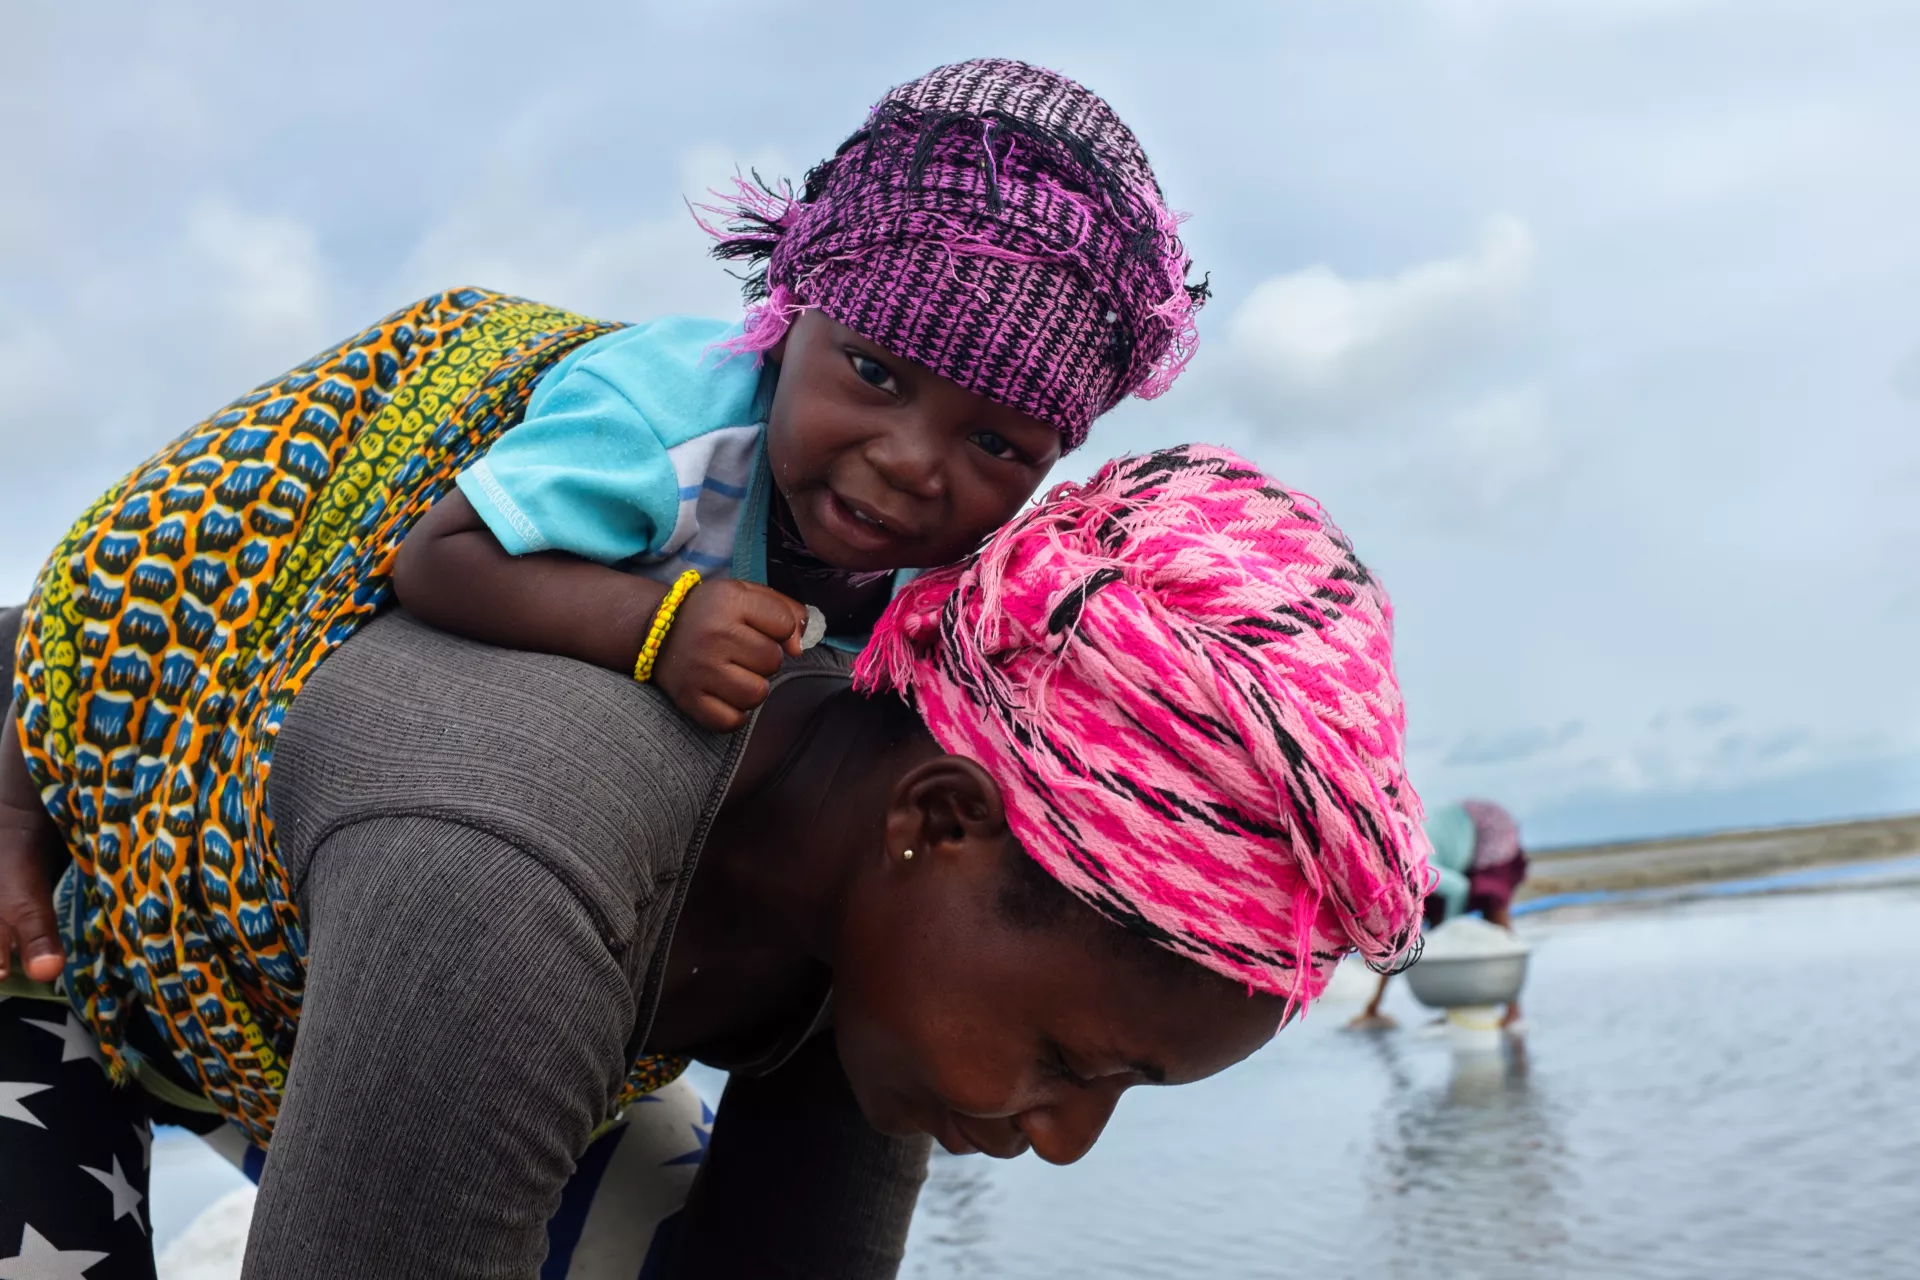 Carrying her young son, Derek, on her back, Joyce gathers salt in a concentrator pan at a production operation near Koluedor on the edge of the Songhor Lagoon in Ghana on 18 May 2015.